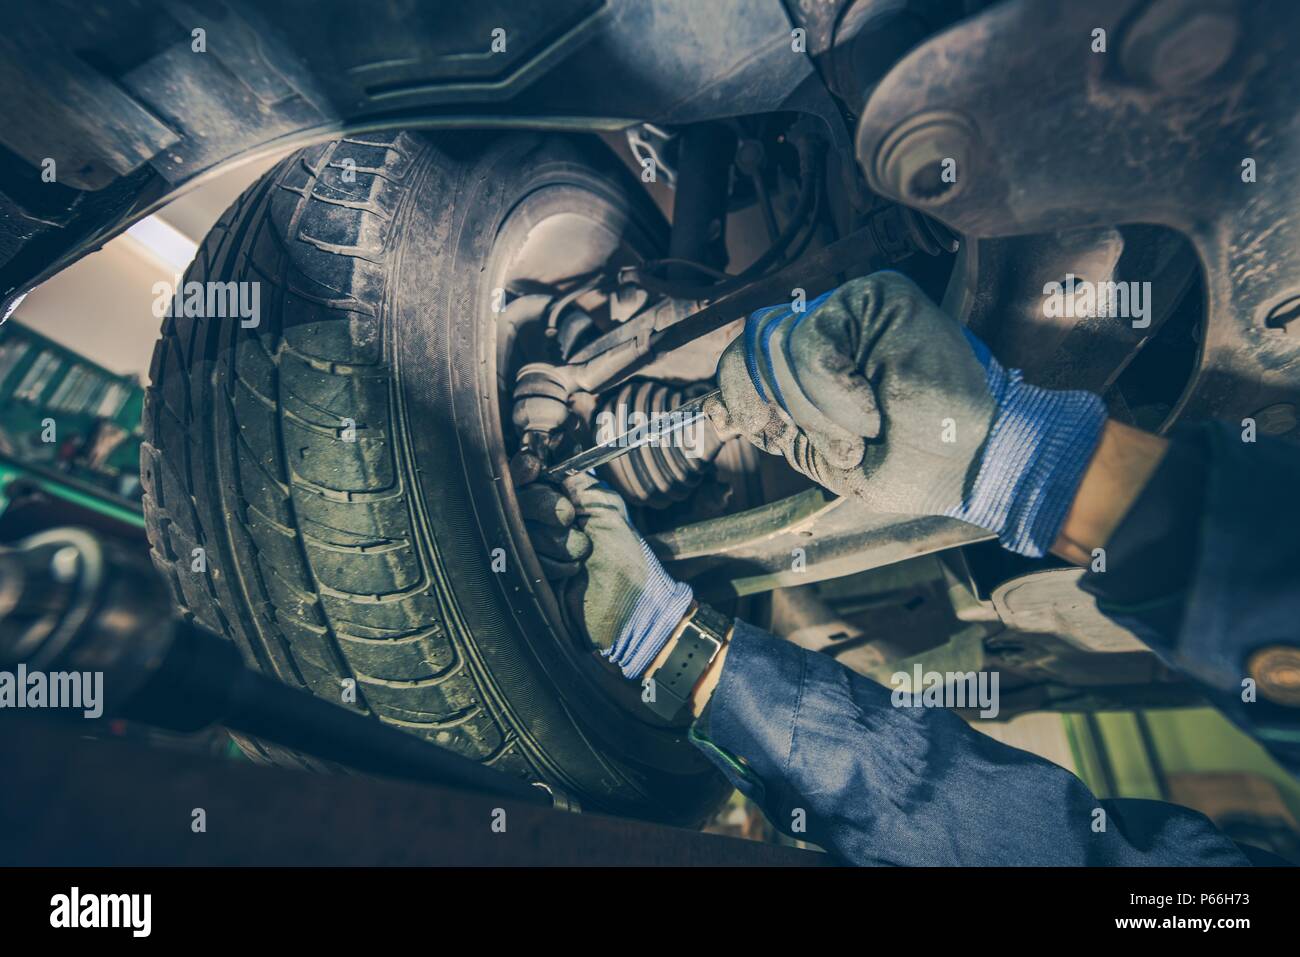 Checking Steering Joints For Wear. Car Mechanic at Work. Auto Service Maintenance. Stock Photo